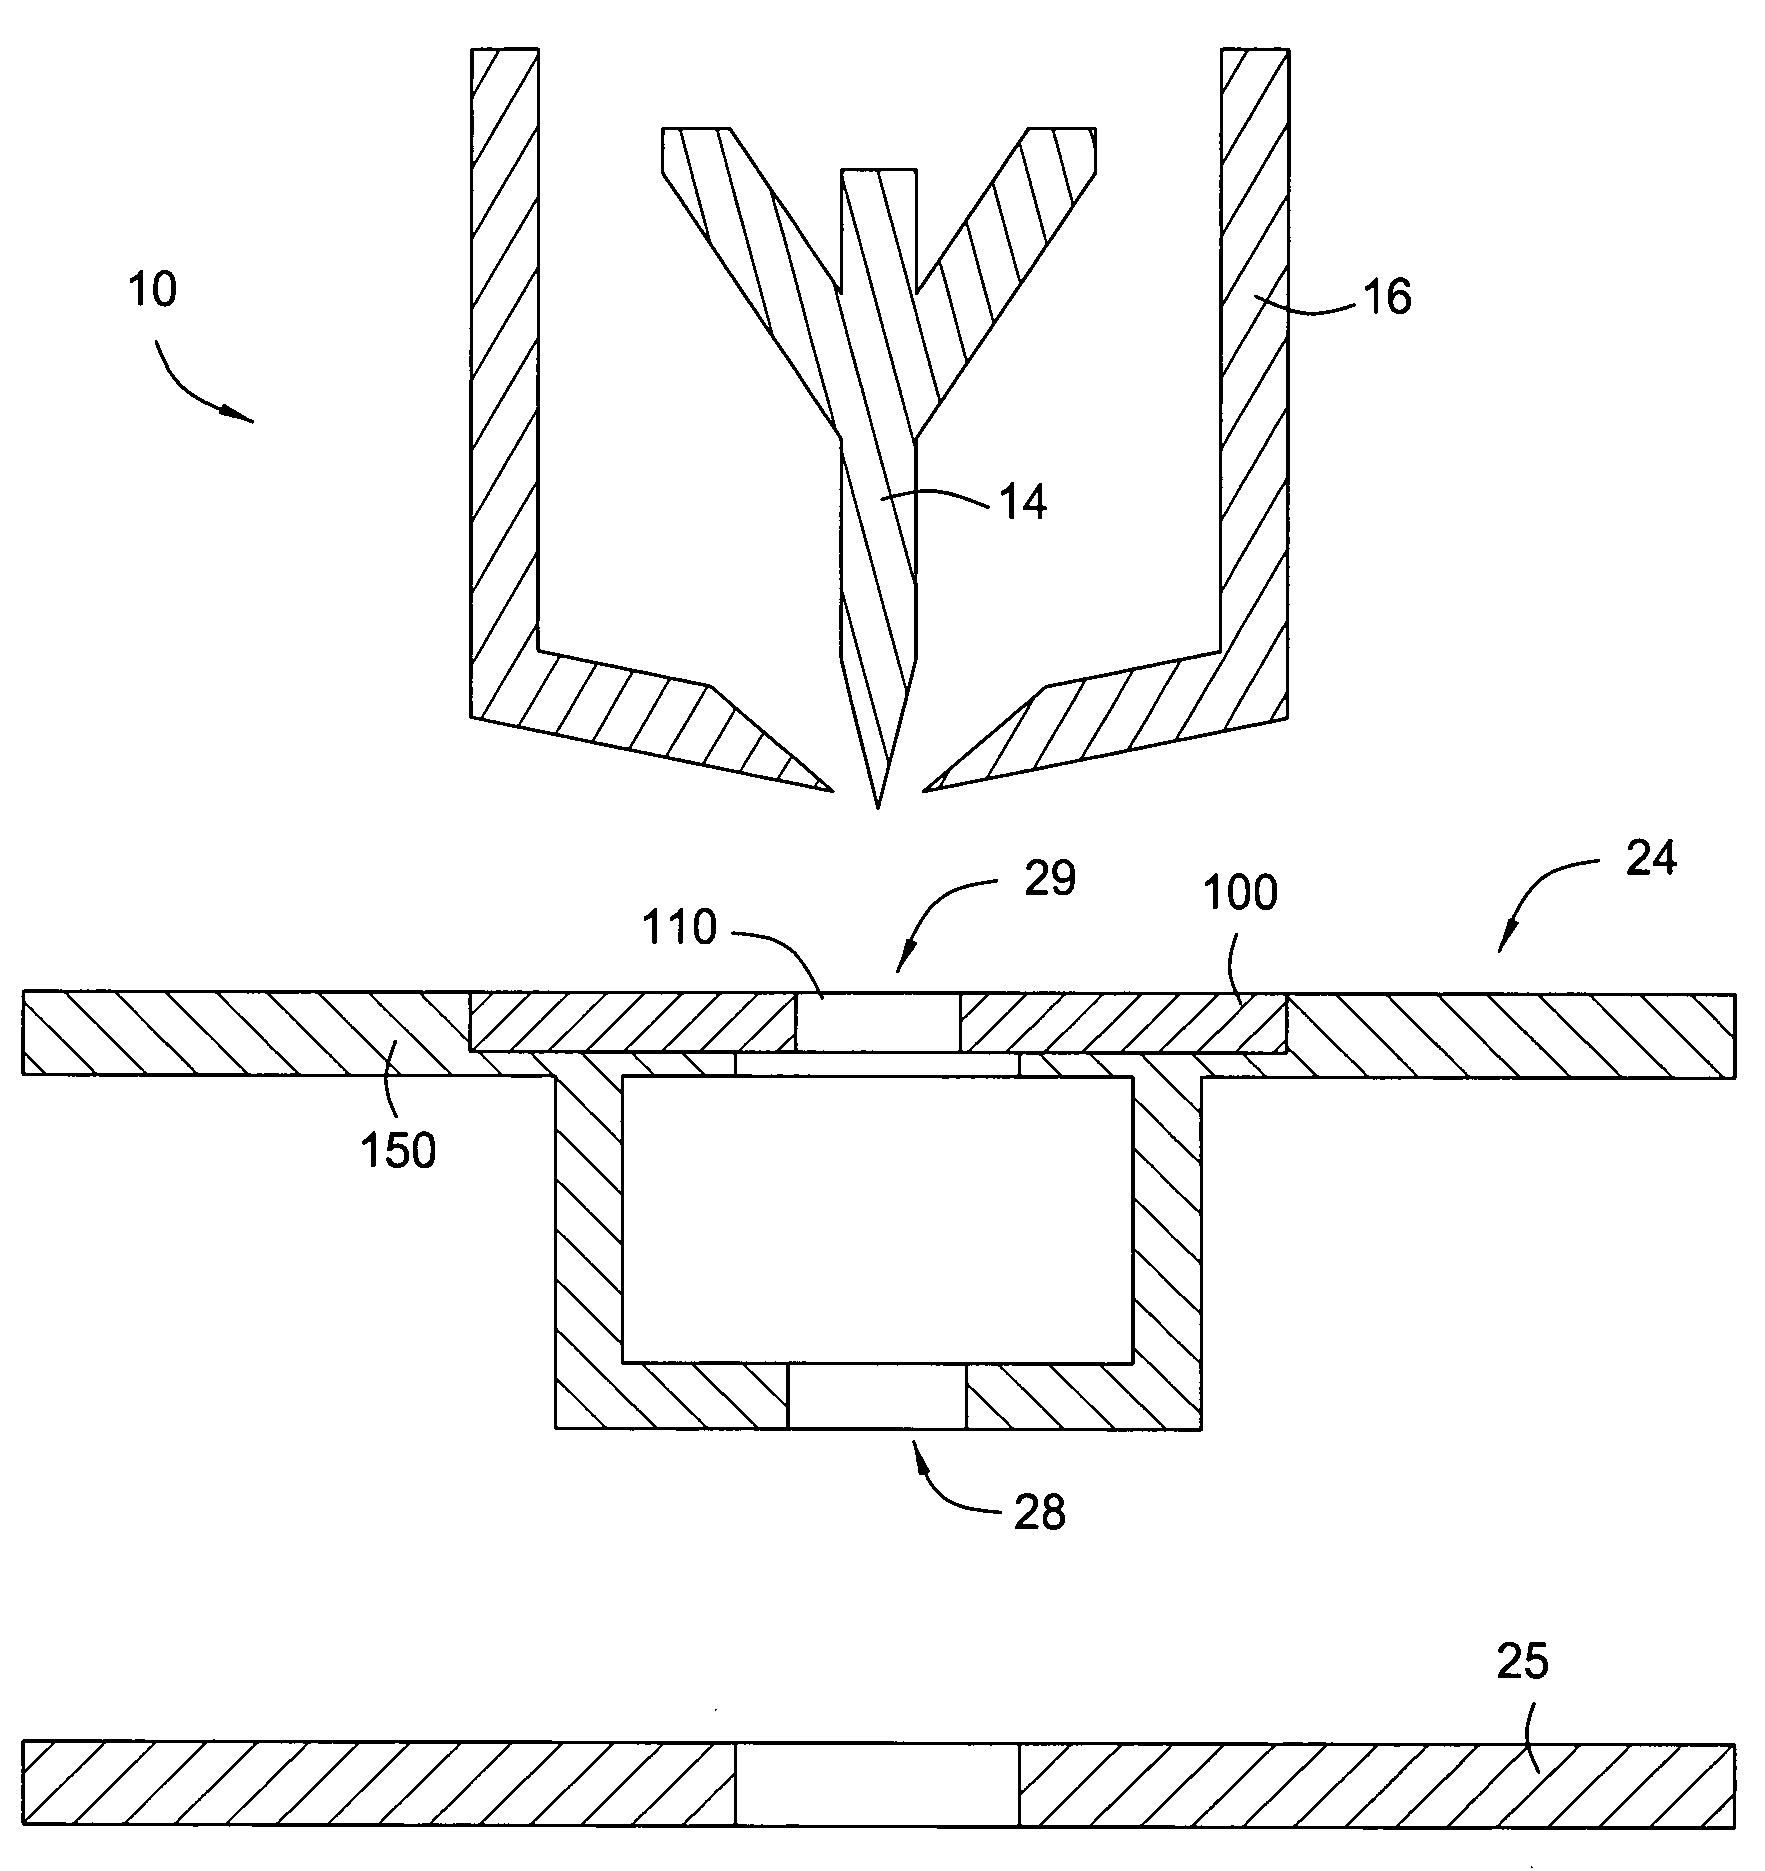 Electron beam source for use in electron gun